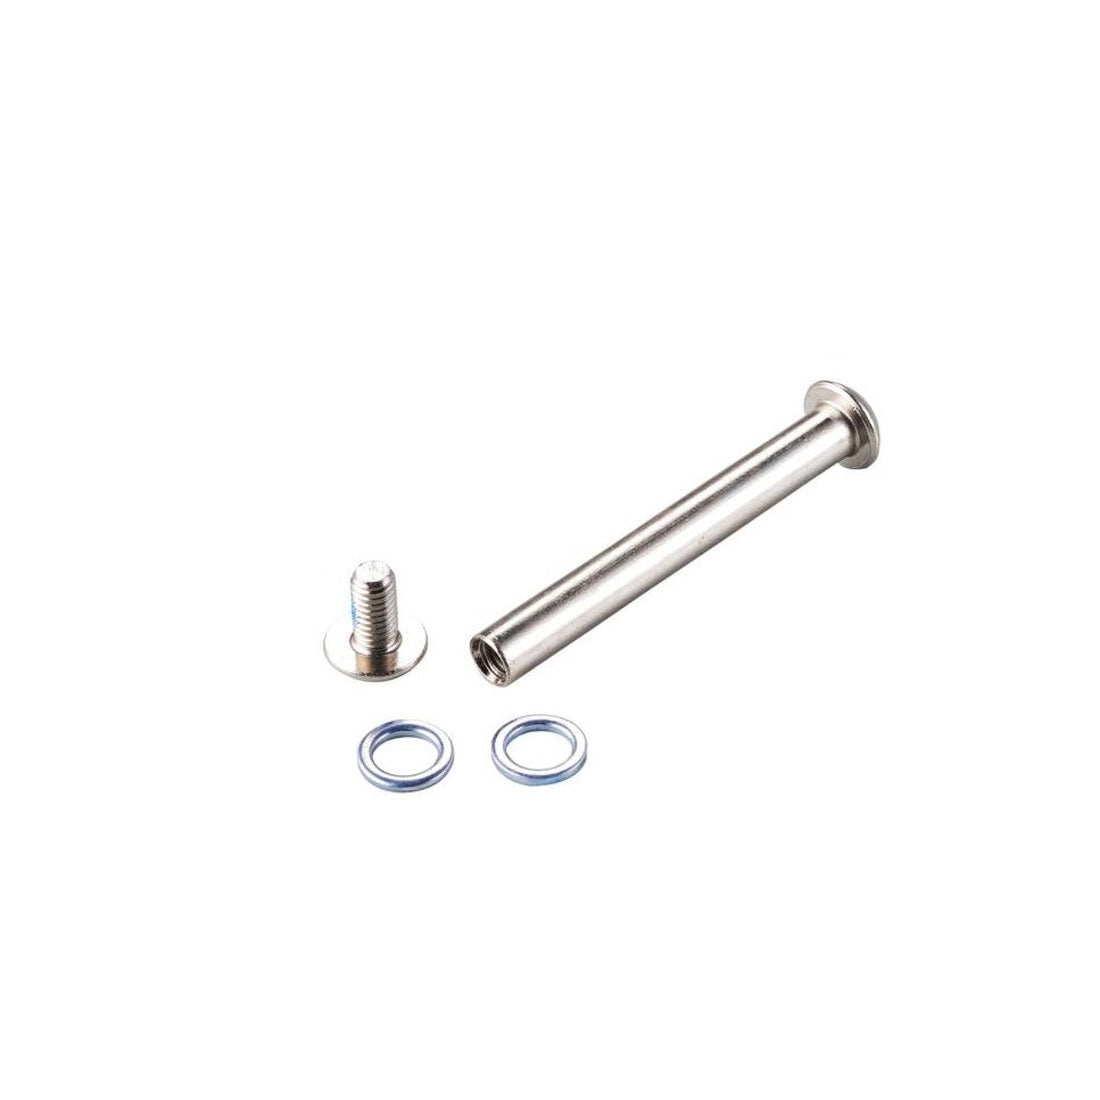 Micro Axle 62mm - 1180 Scooter Hardware and Parts